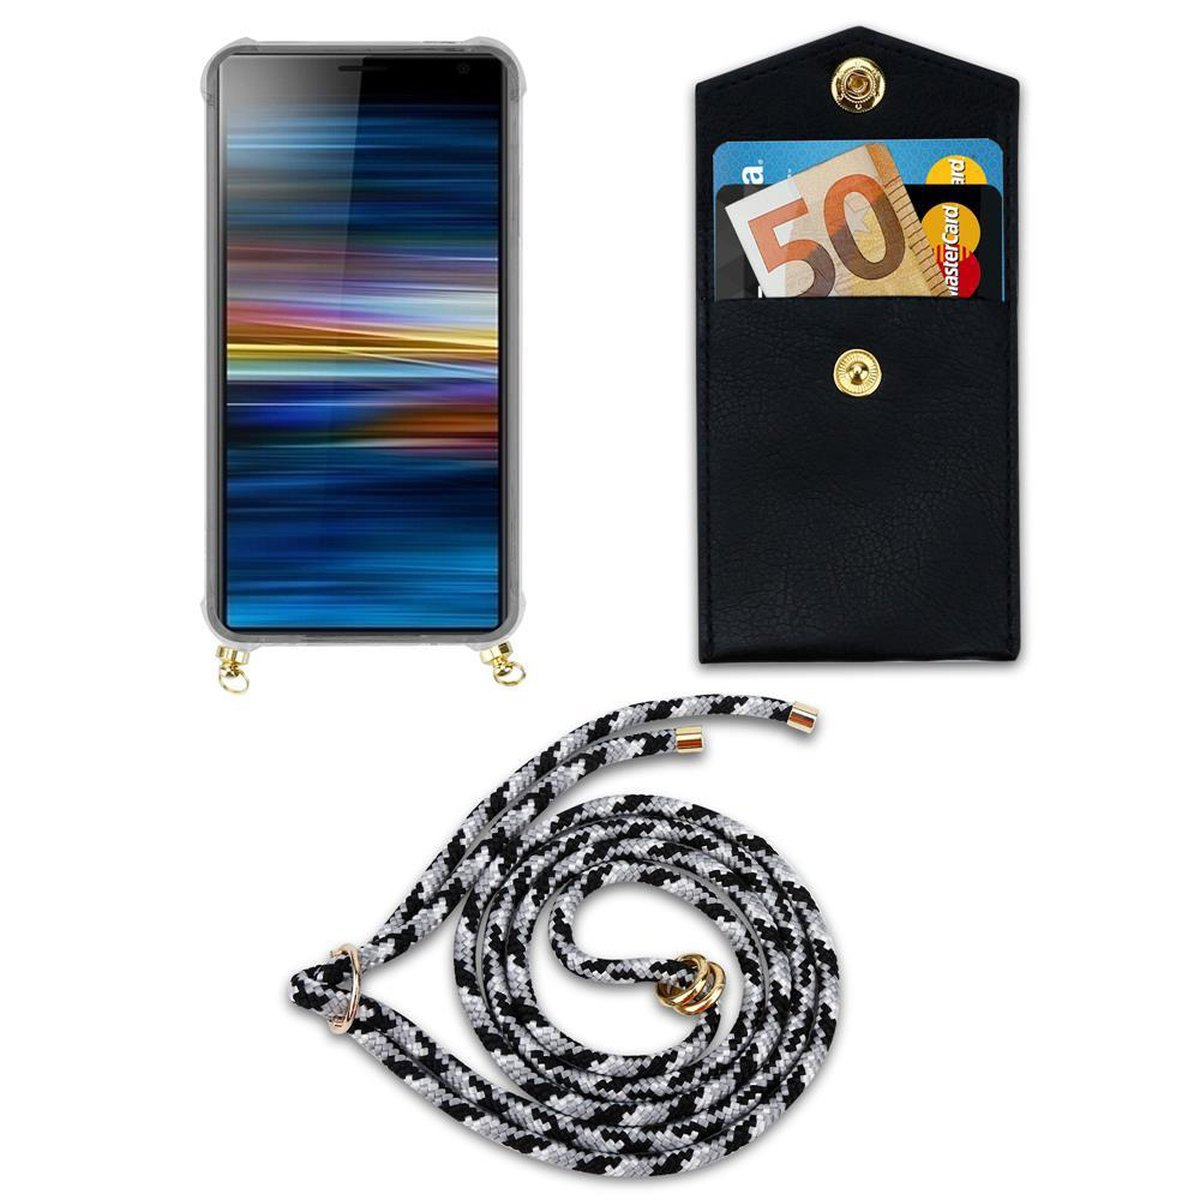 CADORABO Handy Kette mit Gold Sony, Hülle, Backcover, CAMOUFLAGE und SCHWARZ Band 10 Kordel abnehmbarer Ringen, Xperia PLUS